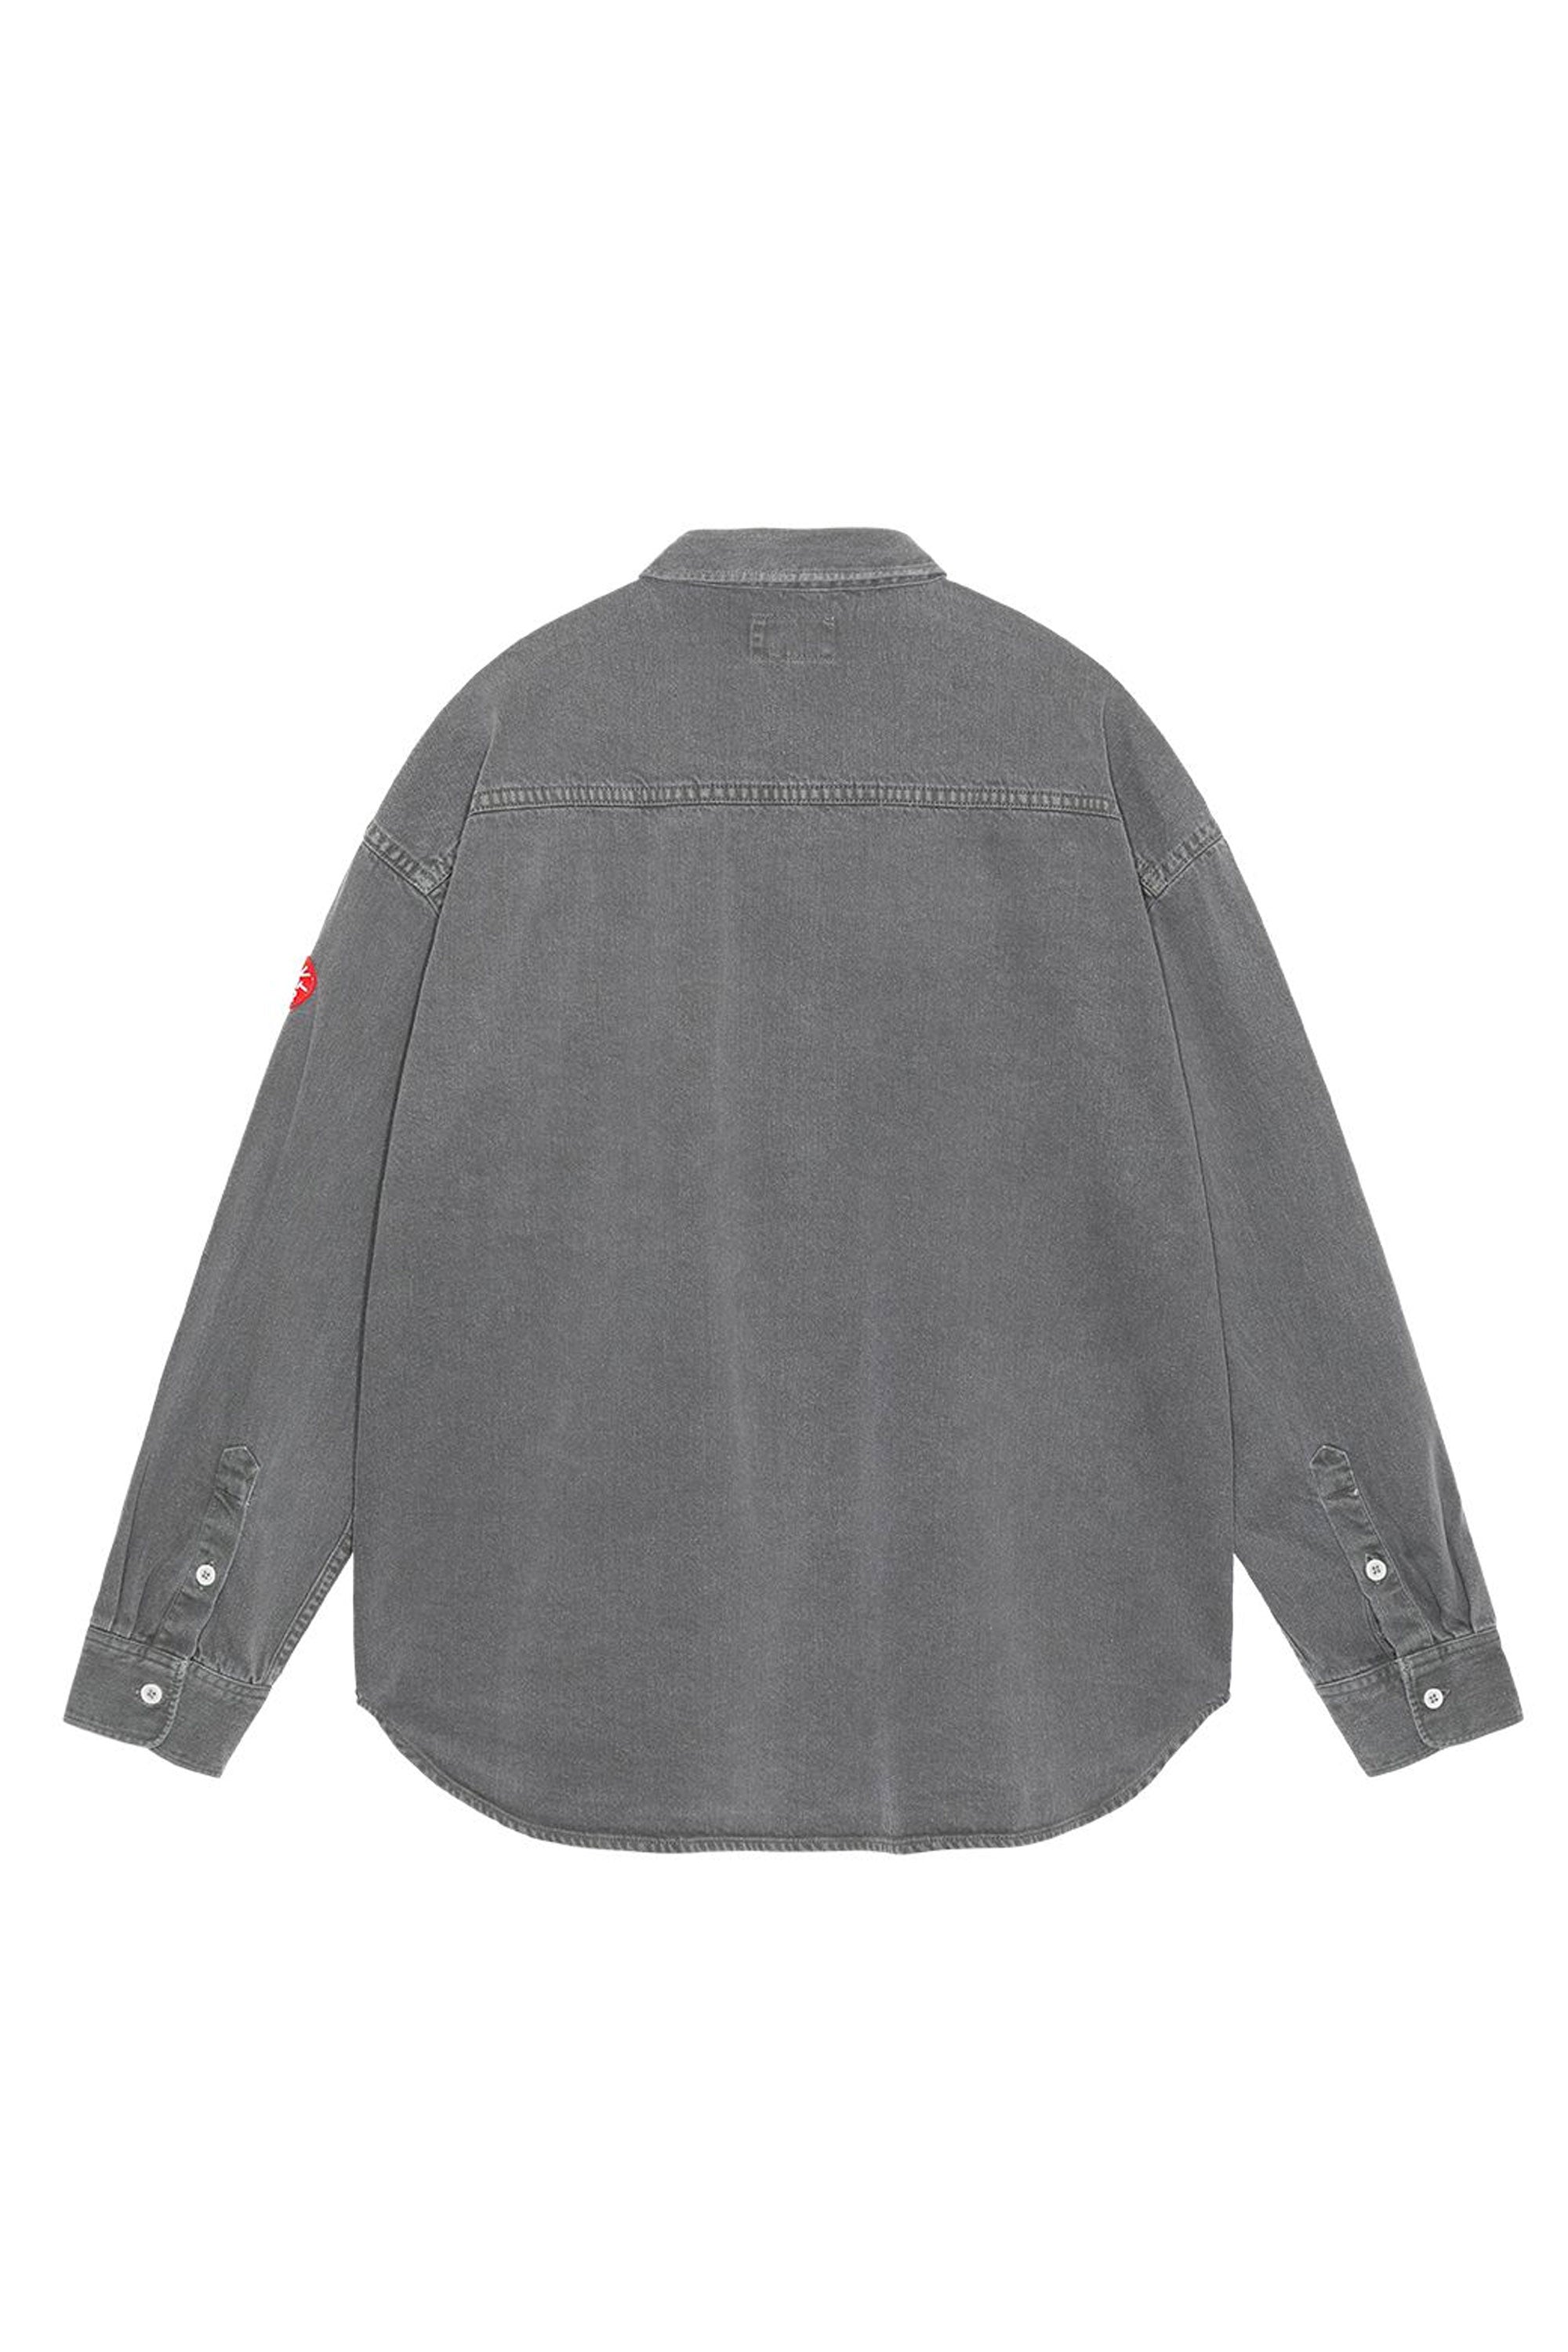 The CAV EMPT - OVERDYE COLOUR DENIM BIG SHIRT  available online with global shipping, and in PAM Stores Melbourne and Sydney.